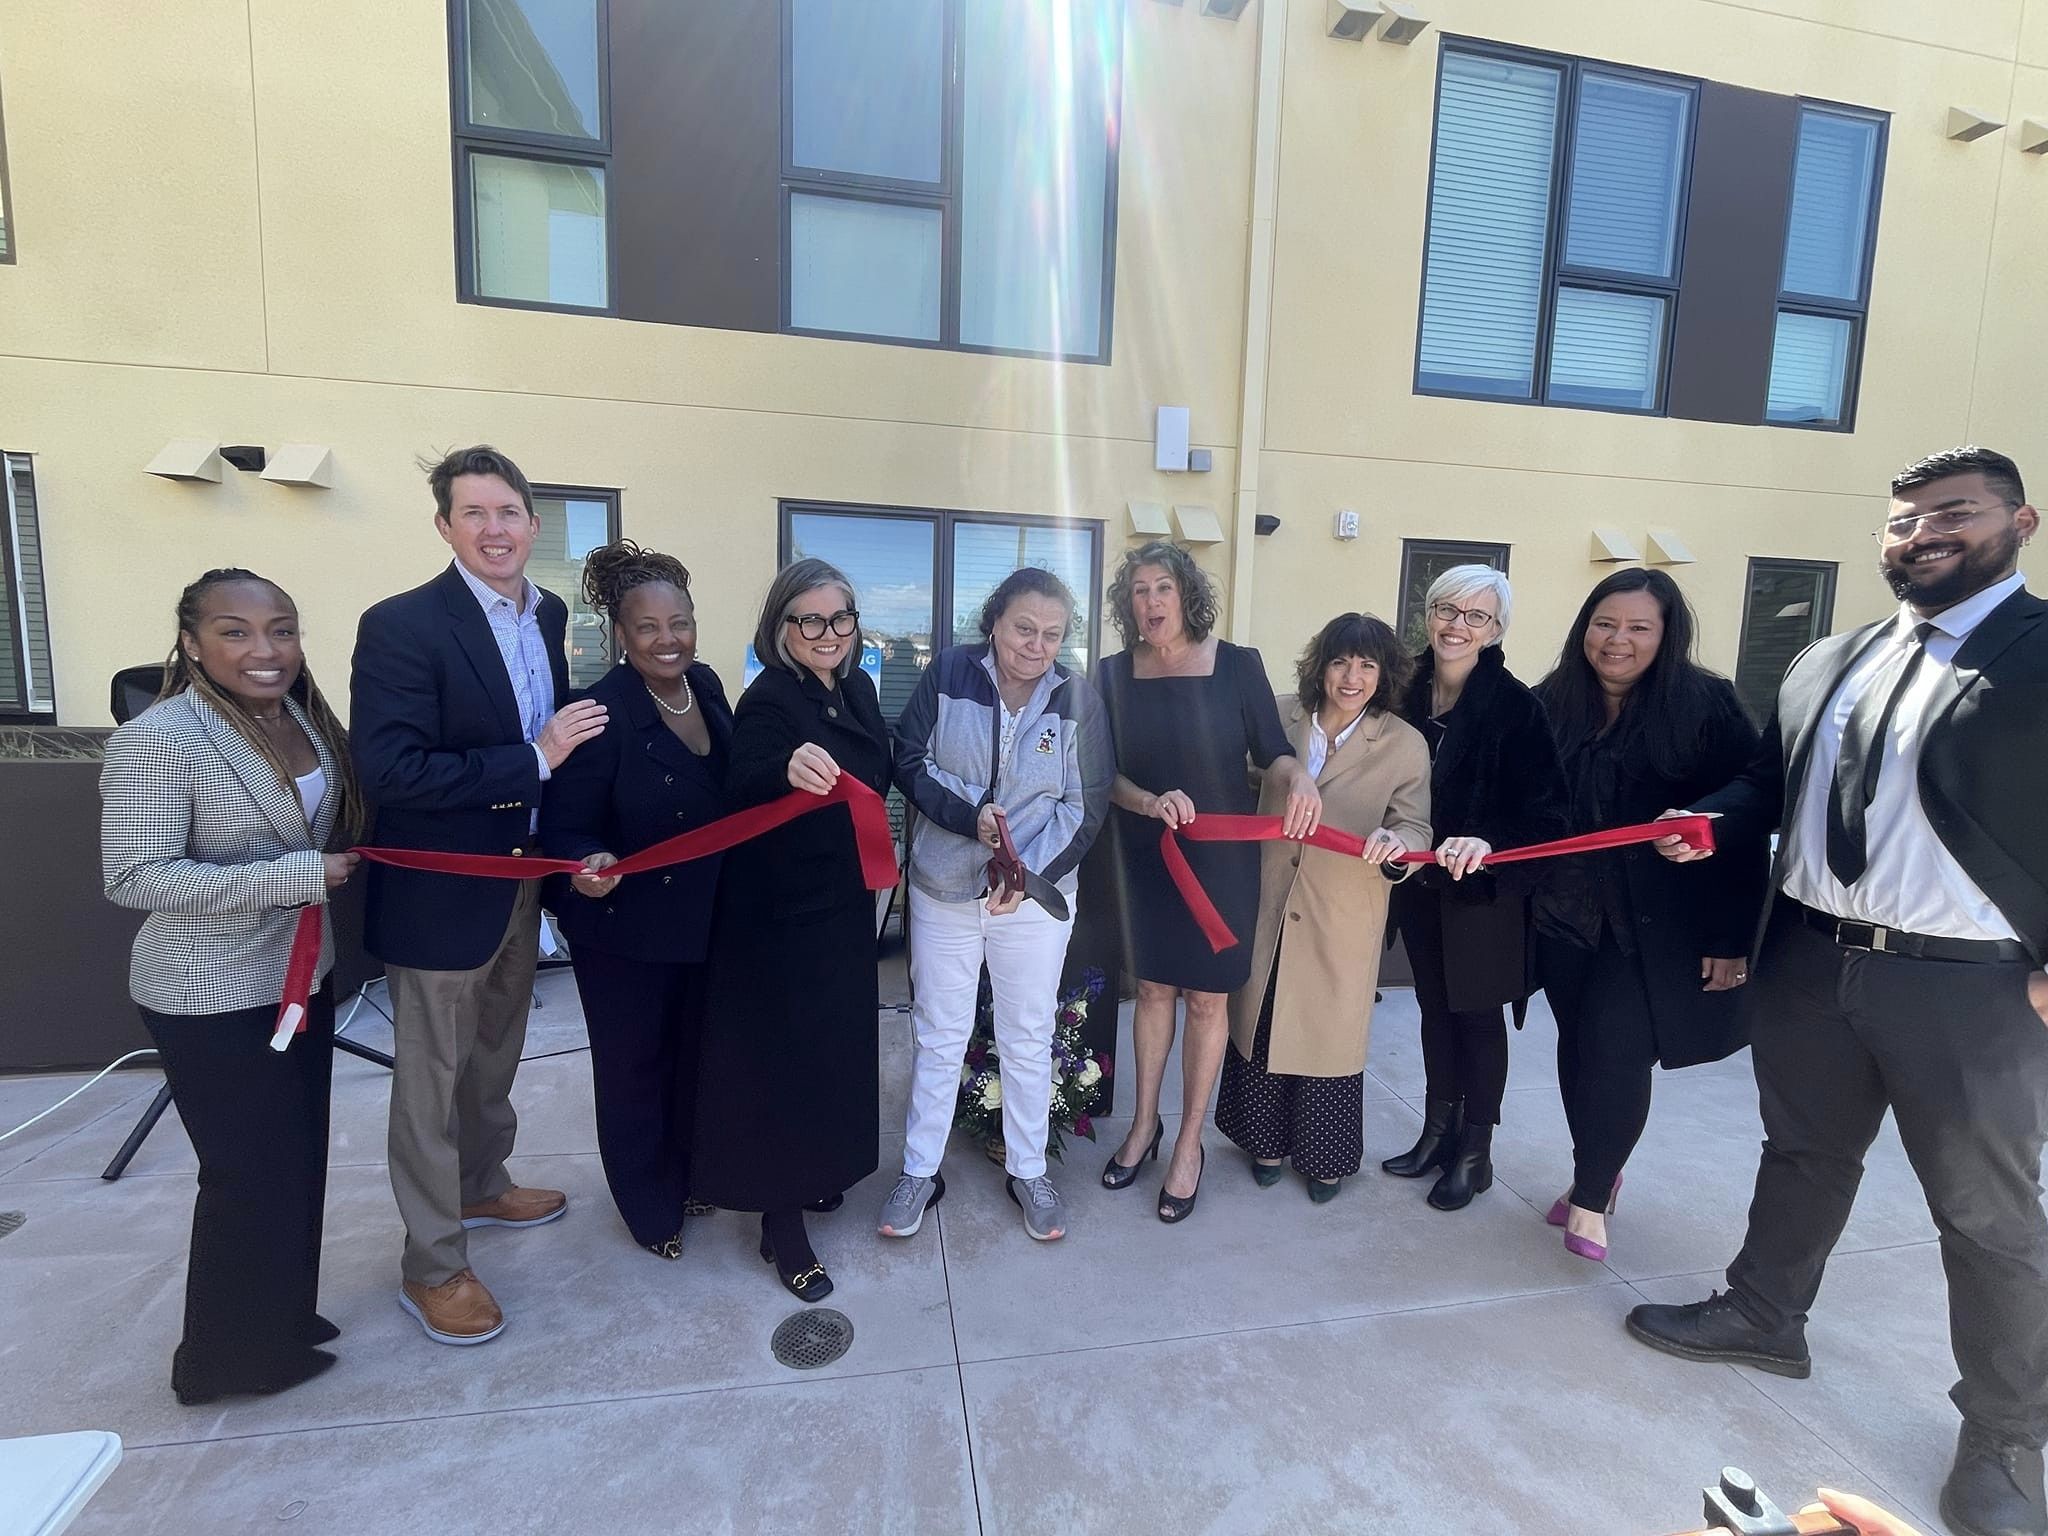 Grand Opening of The Silva Crossing Apartments